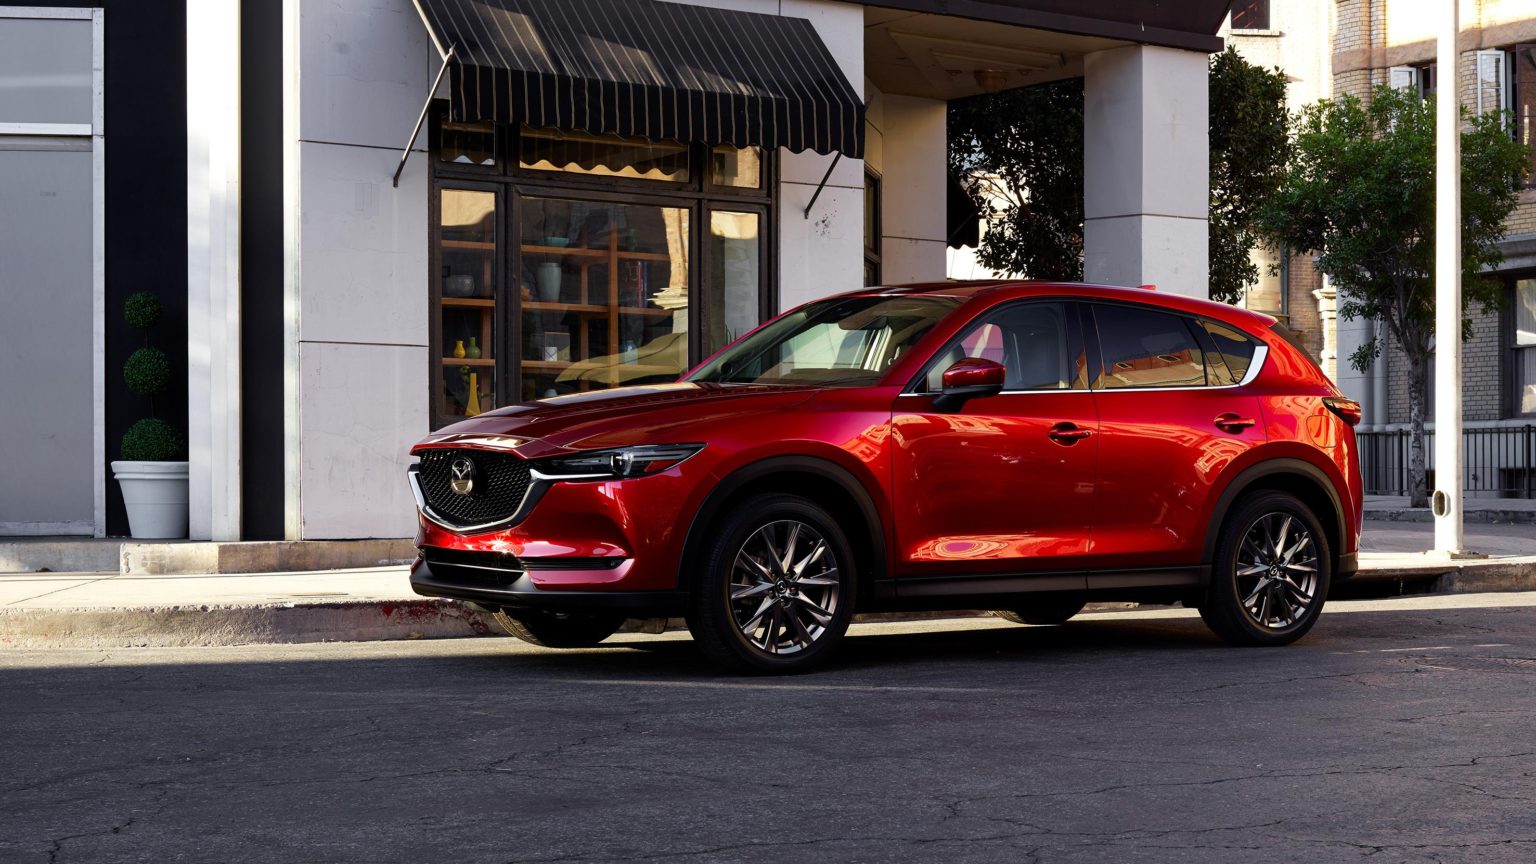 The CX-5's styling is sharp and clean.